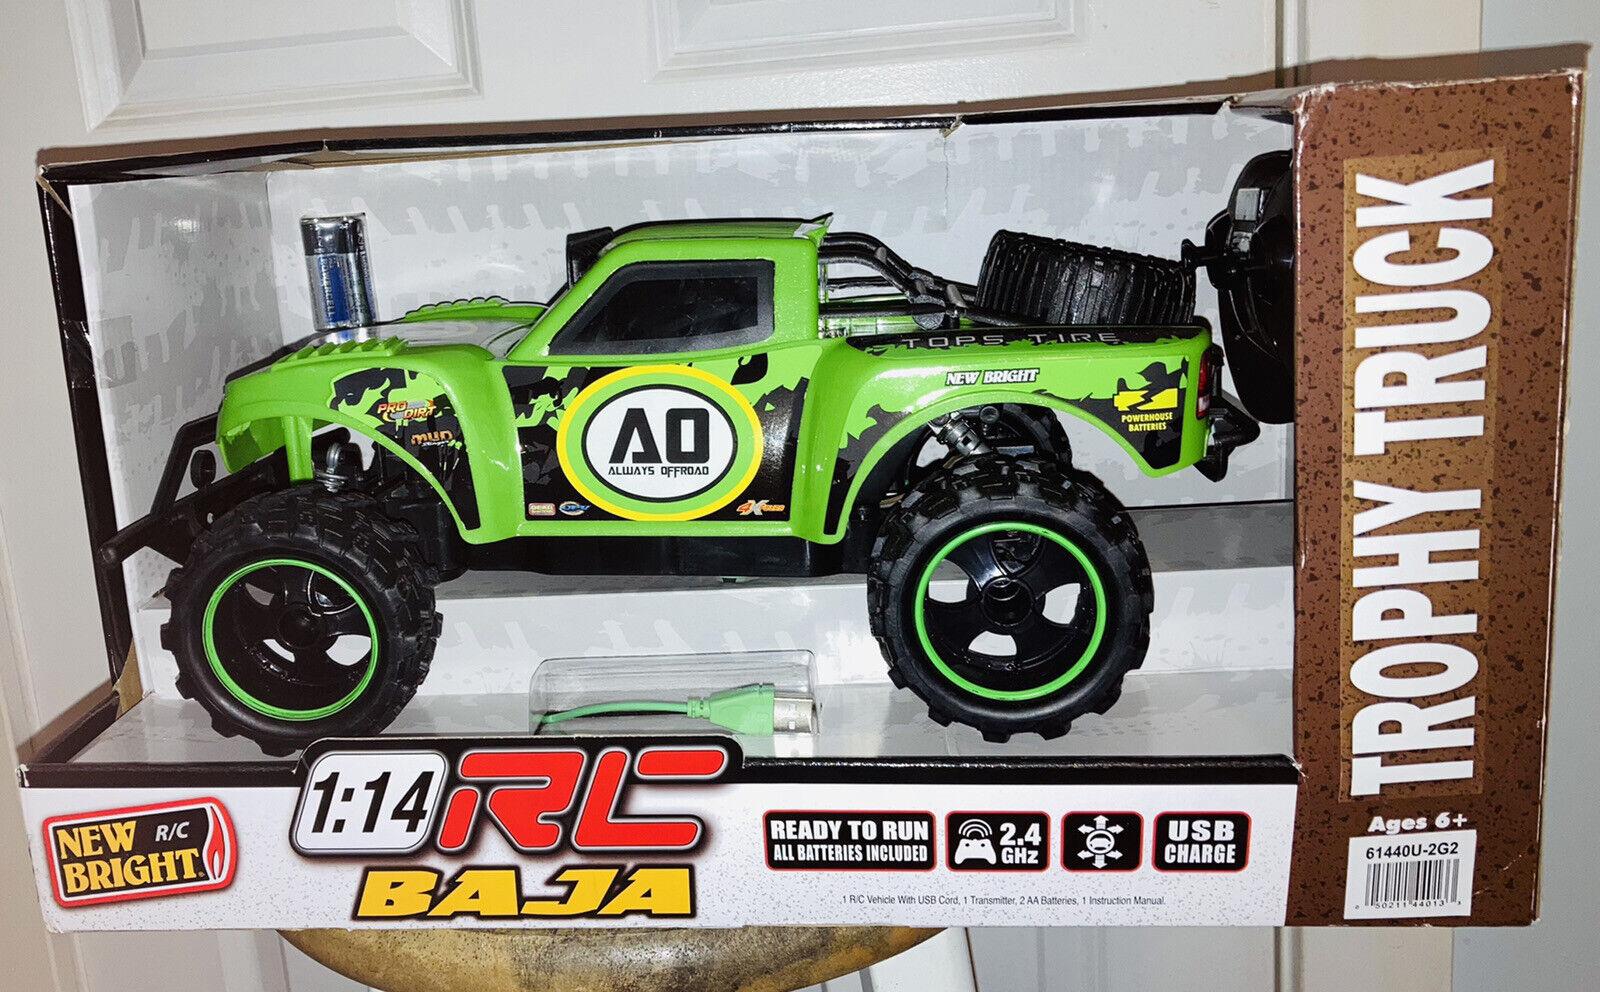 Trophy Truck Rc Car: Buying a trophy truck RC car? Consider these popular websites for your purchase!